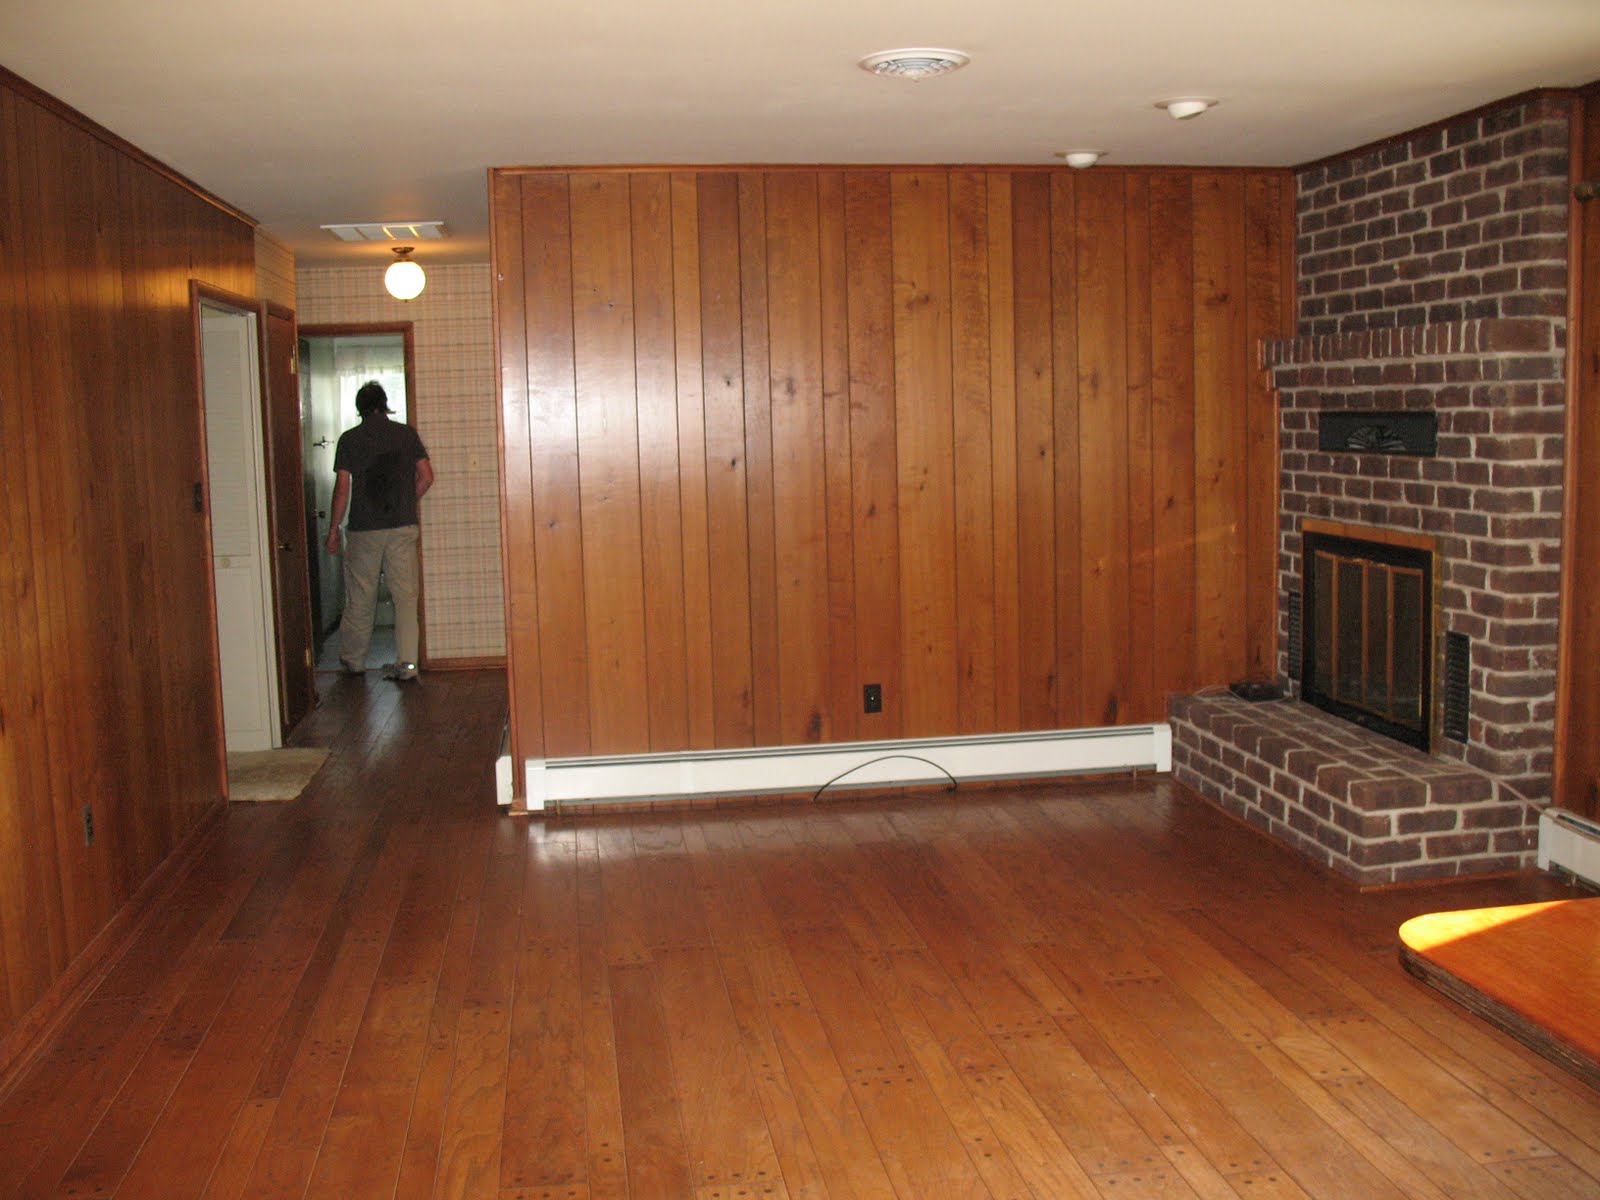 Lara and Bill: Painting wood paneling- The den project